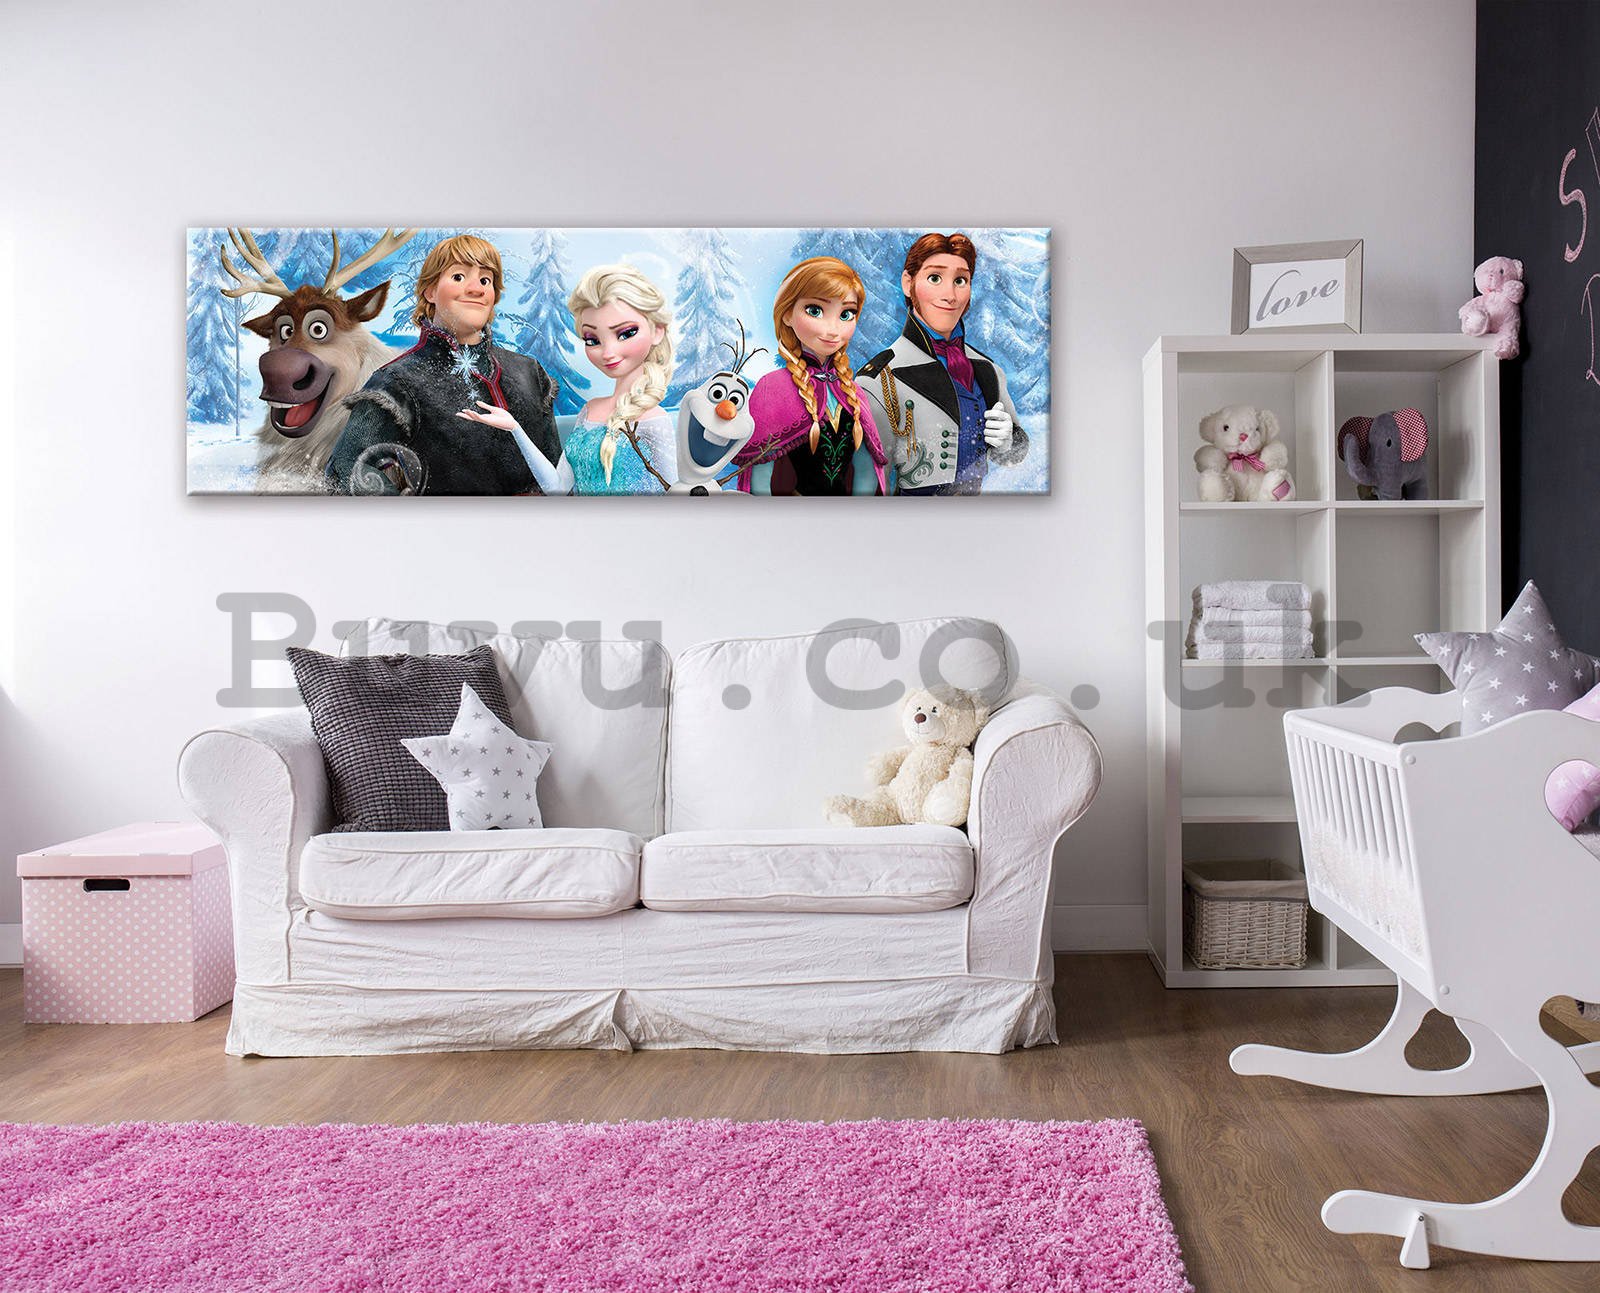 Painting on canvas: Frozen (12) - 145x45 cm